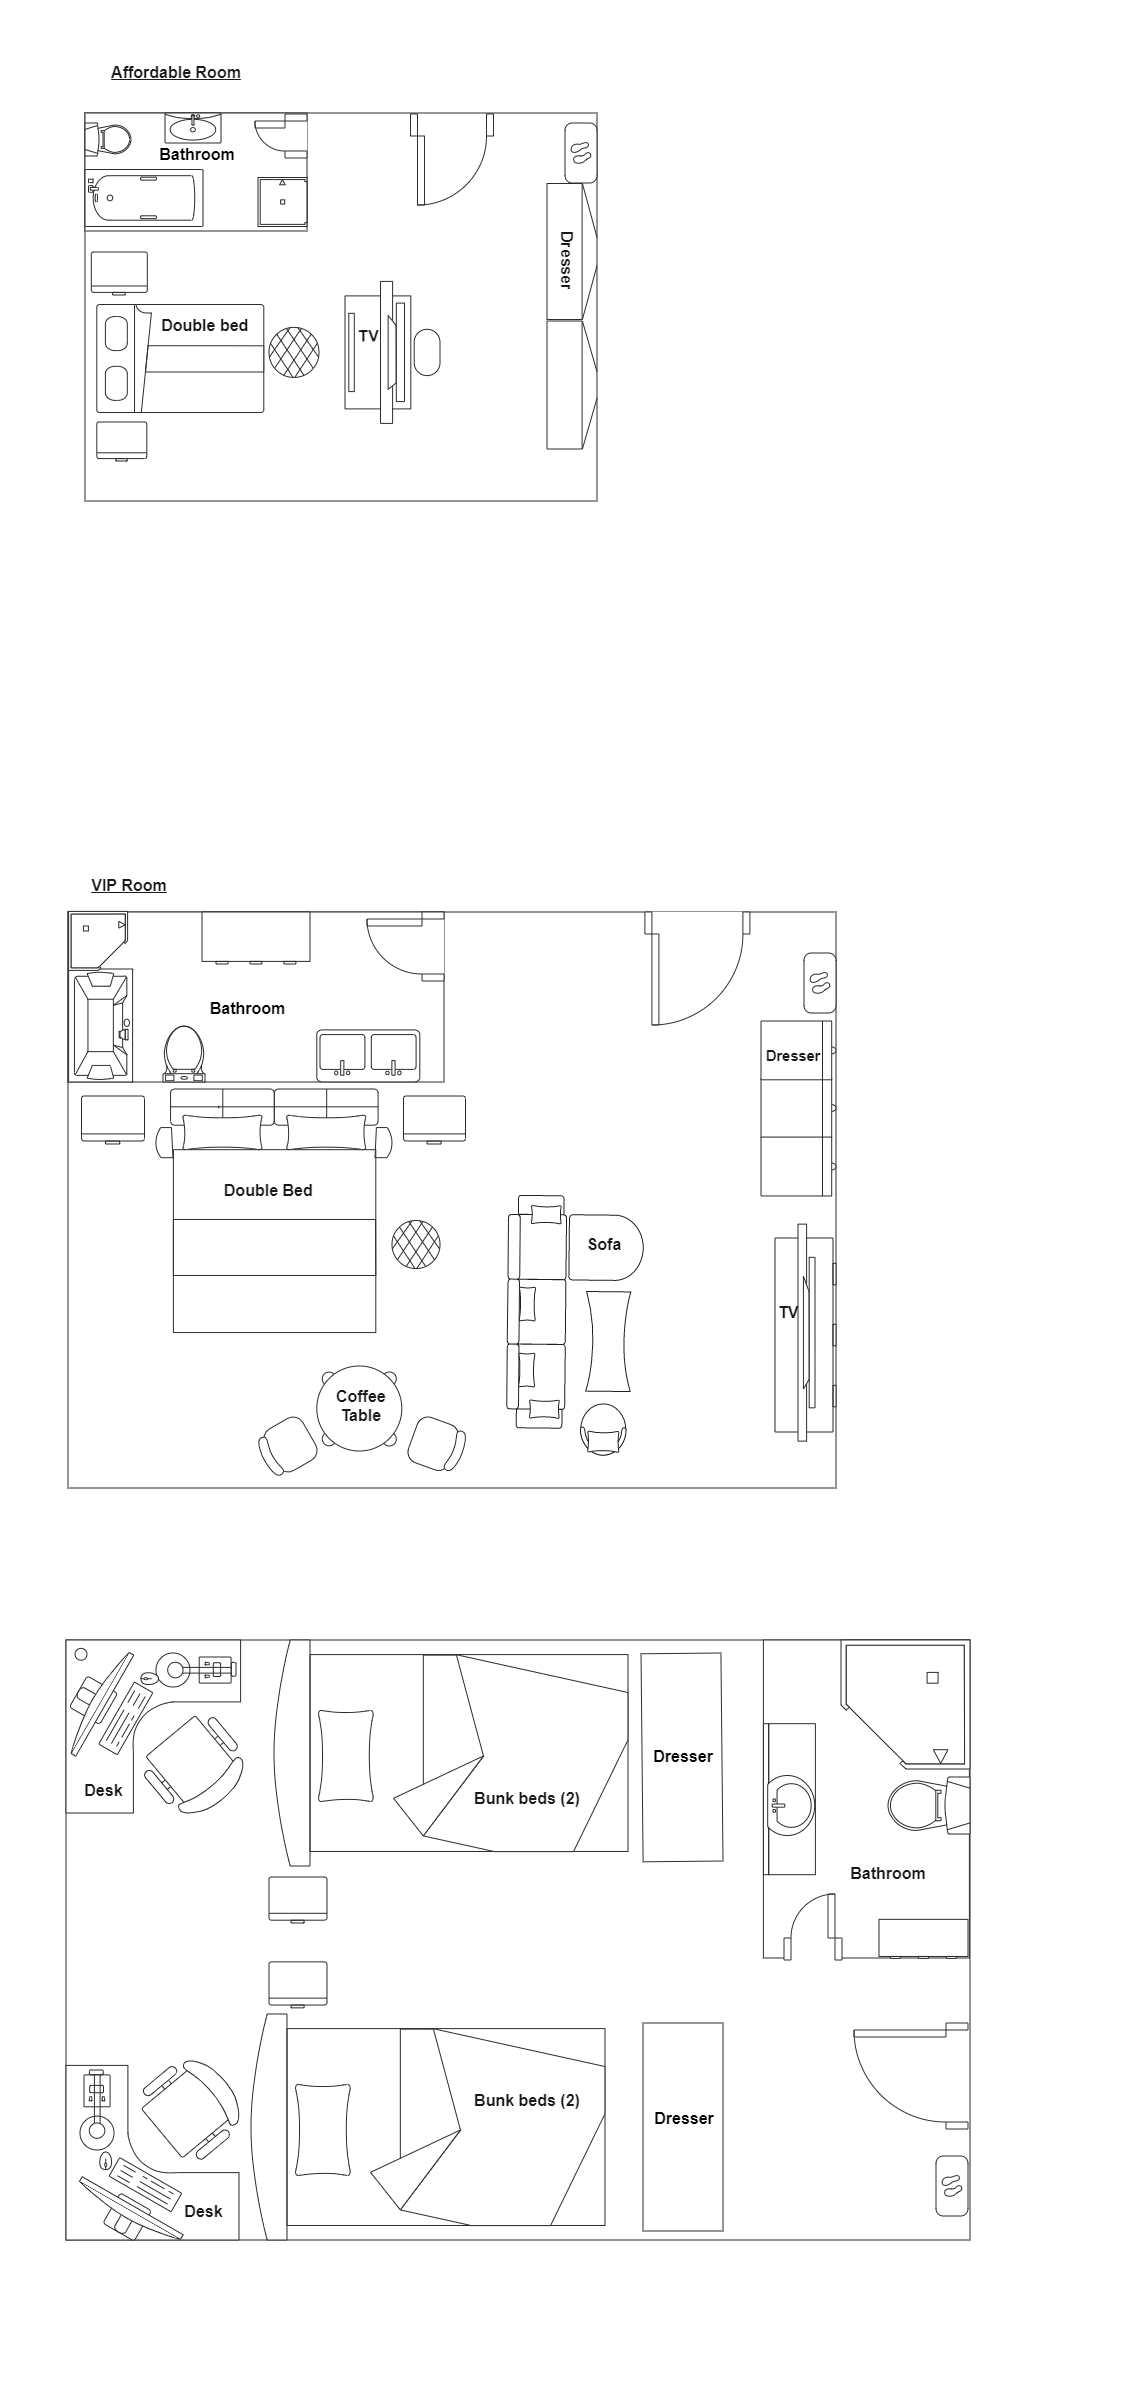 Affordable Room diagram below shows how you can create a one-bedroom plan with different room elements, like a dressing table, double bed, bathroom, and television. The room floor plan below is important for the architecture to understand how they can cre